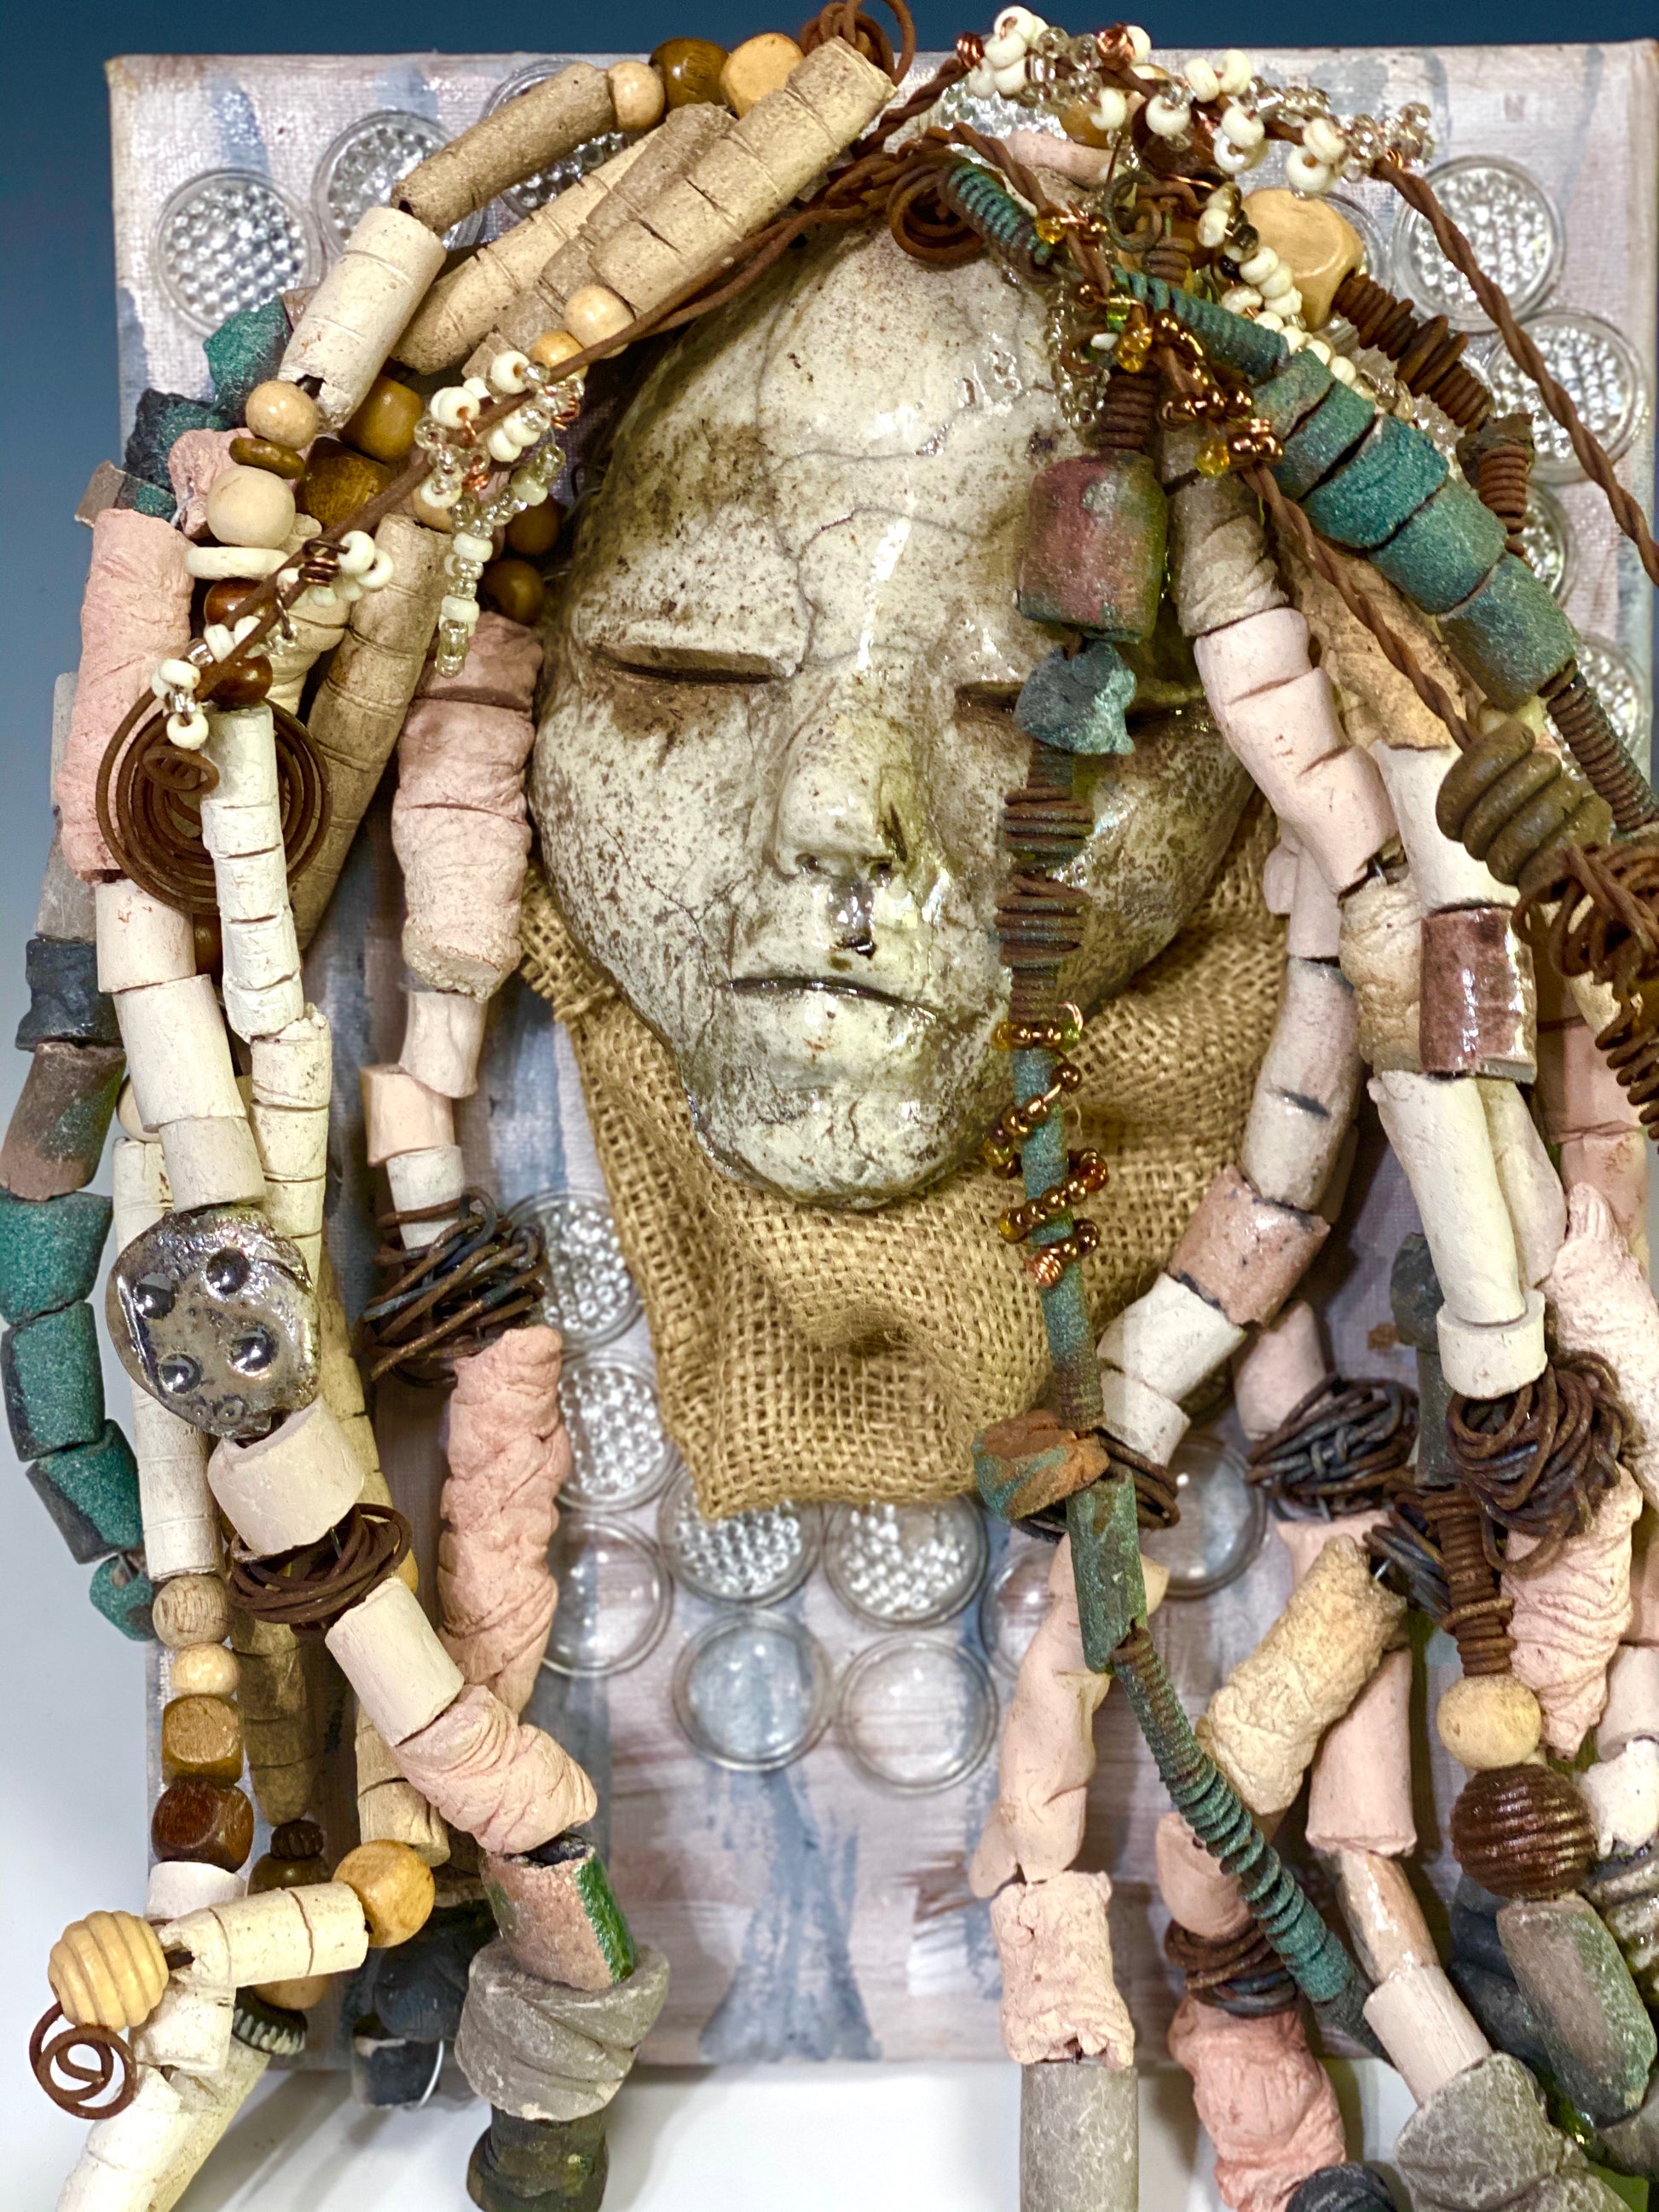 Alaskaya is mounted on a 9"x 12" painted canvas. I spent about 4 hours or more just fixing Alaskaya's hair and attaching her beads! She has over 50 feet of 16 gauge wire and copper strands for hair and over 50 raku beads. Alaskaya weighs 4.03 lbs. Alaskaya has a white crackle face with an angelic demeanor. Alaskaya is ready to be hung!